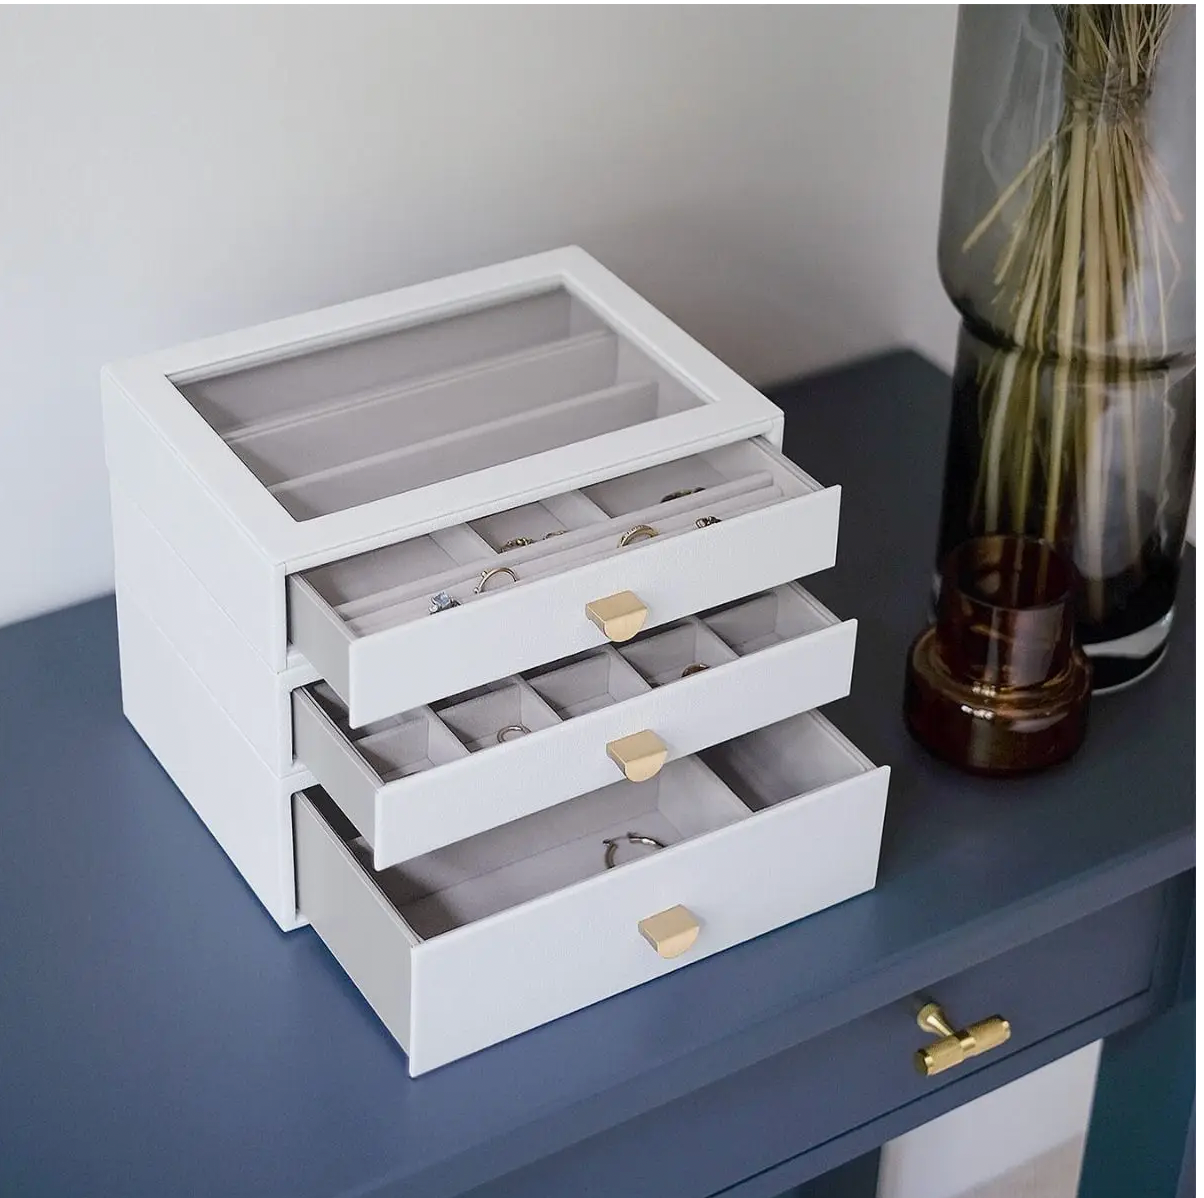 Pebble White Classic Jewellery Box set of 3 (with drawers)